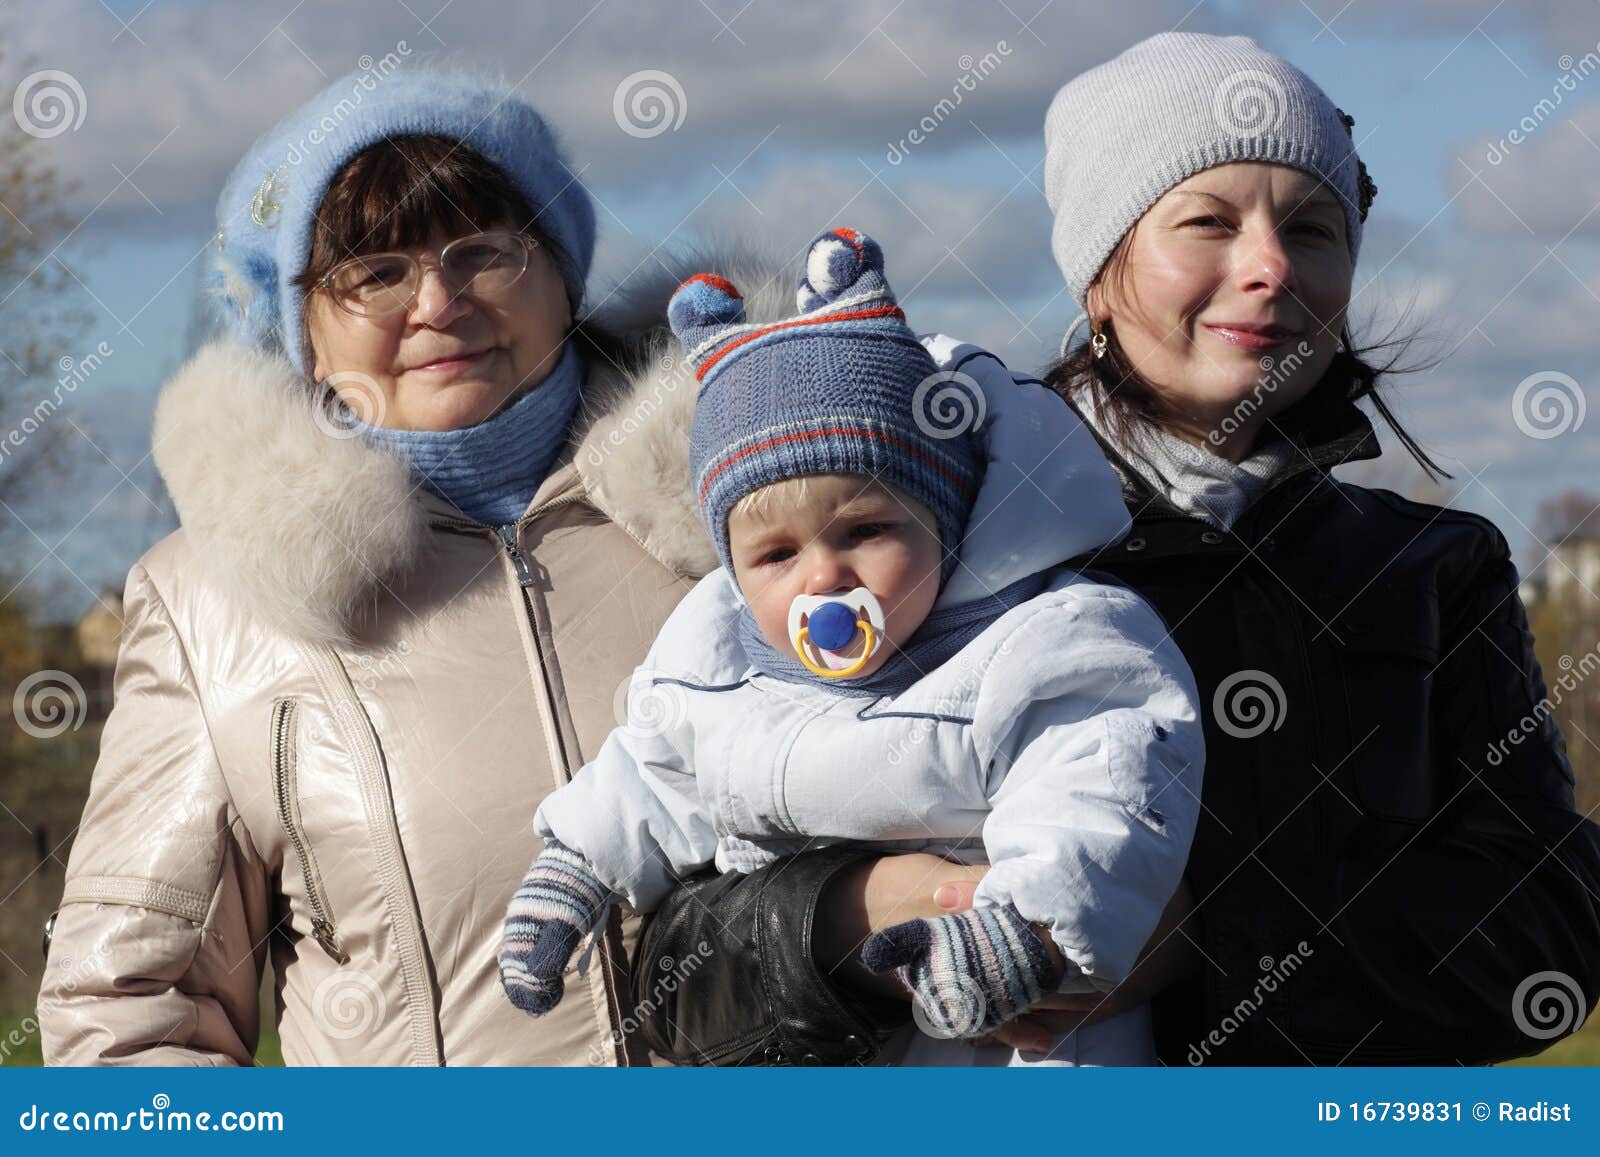 Grandmother With Daughter And Grandson Stock Image Image 16739831